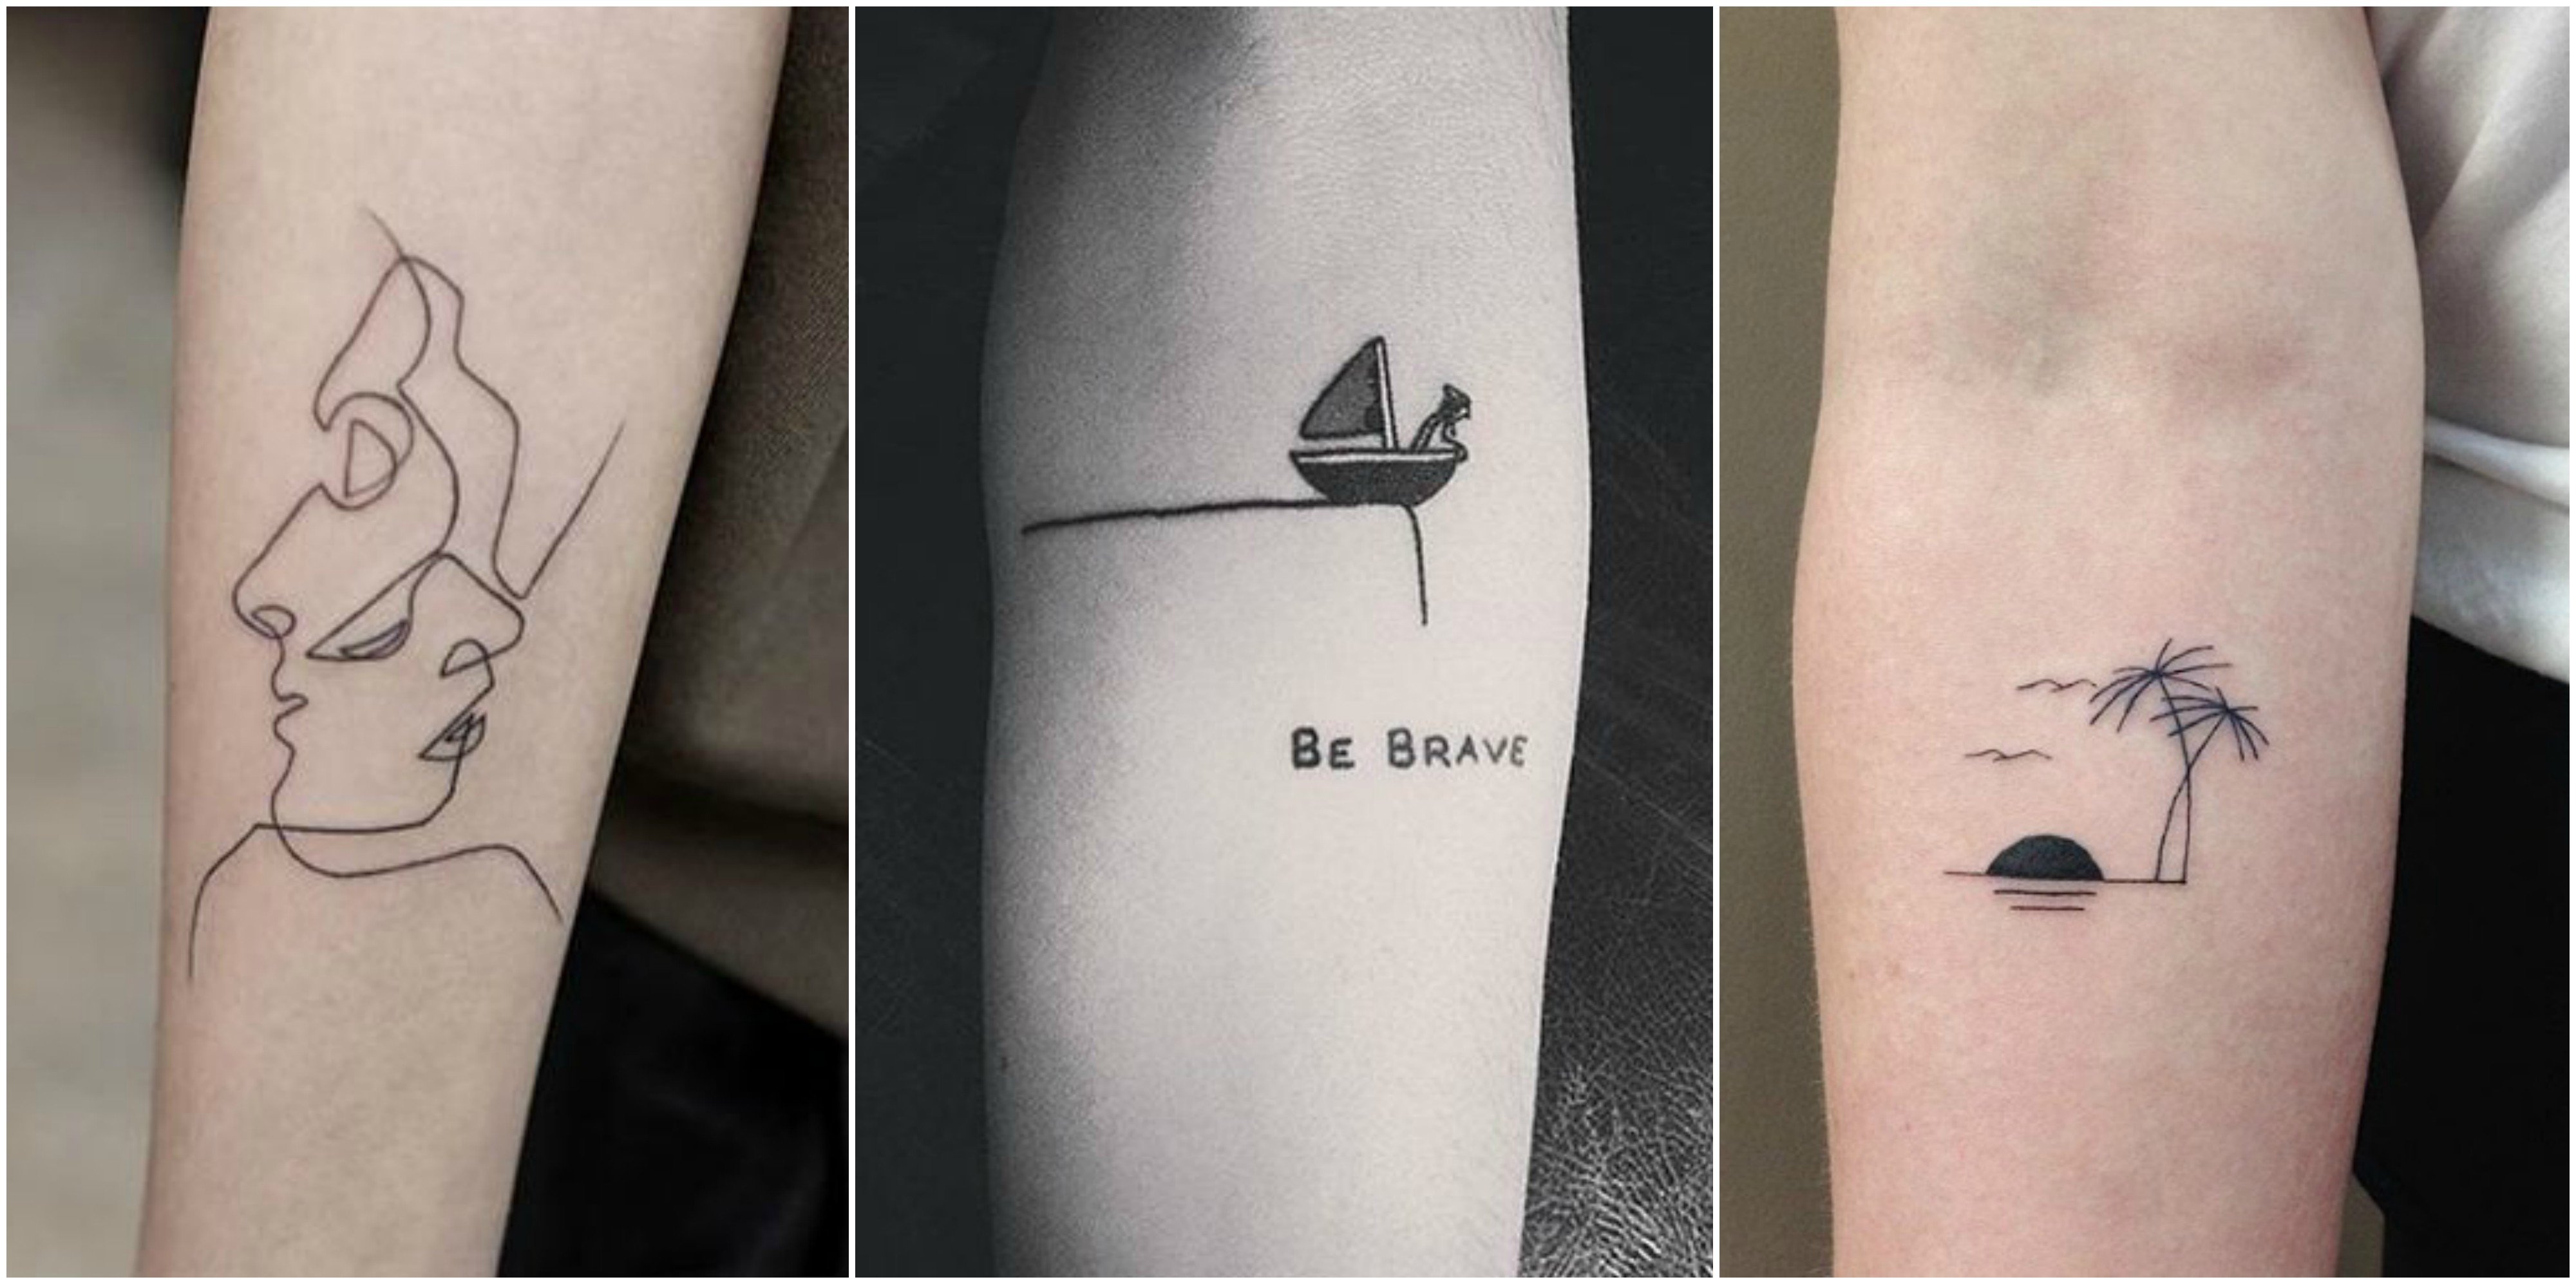 22 Unique Tattoo Ideas That Are Not Flowers, Arrows, Or Geometrical Figures